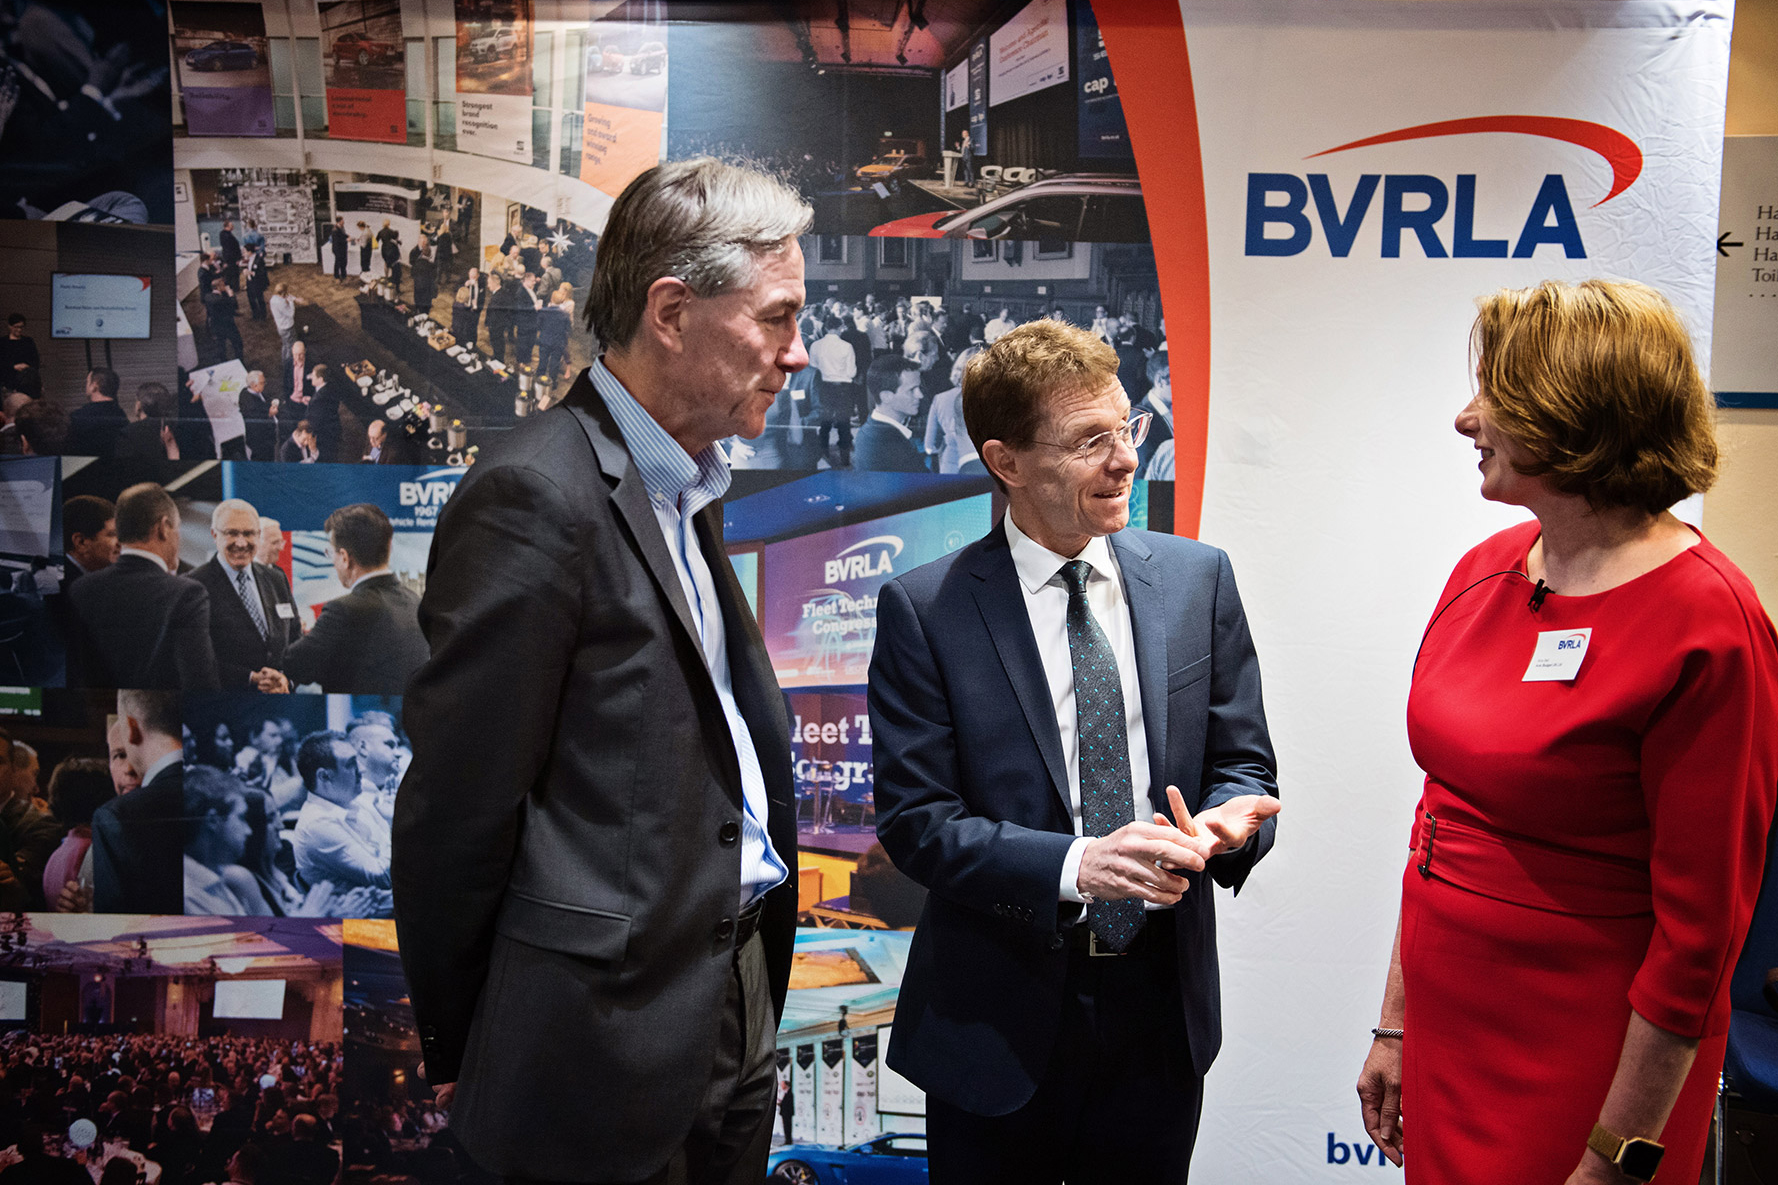 Mayor of Birmingham, Andy Street talking to BVRLA Chair and Chief Executive. 